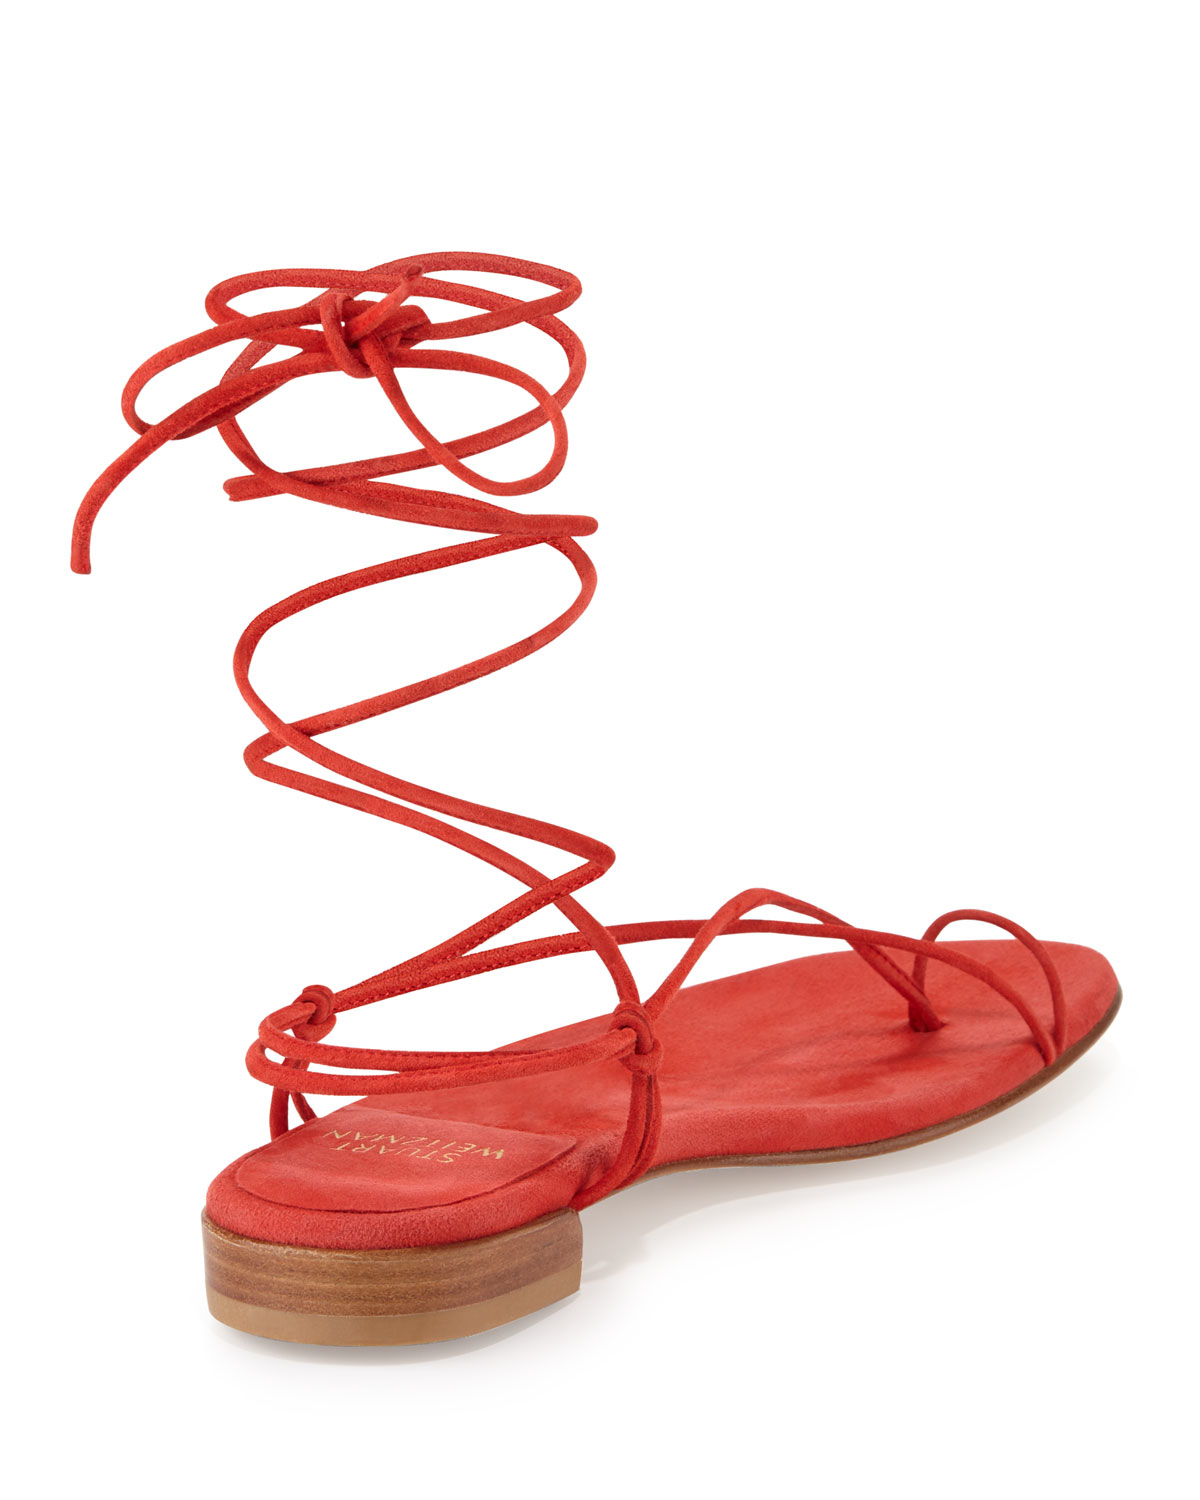 red sandals lace up